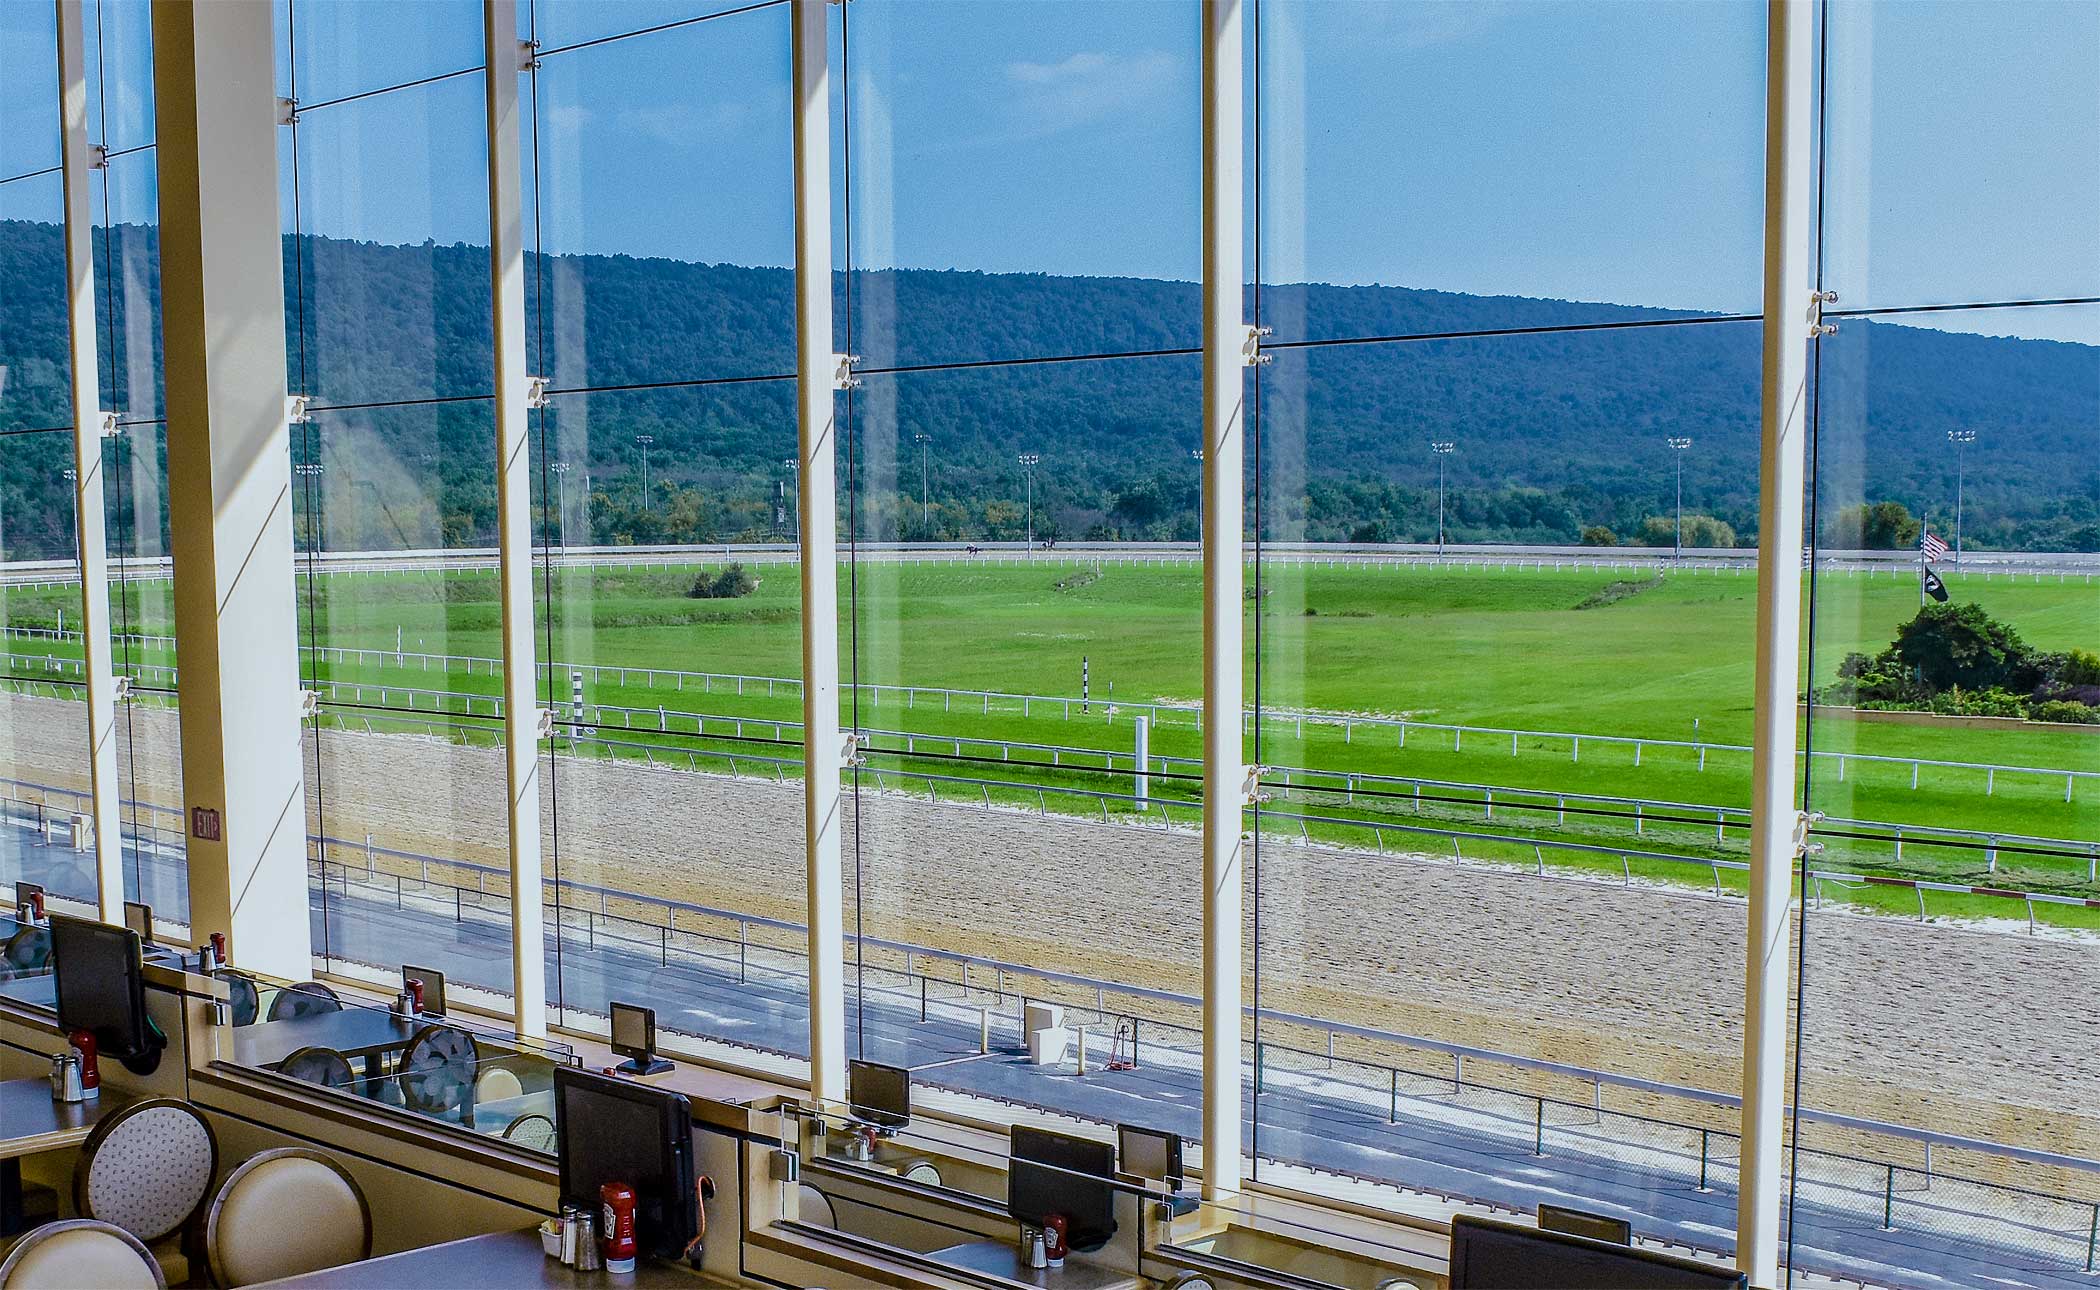 Hollywood Casino at Penn National Race Course located in Grantville, PA